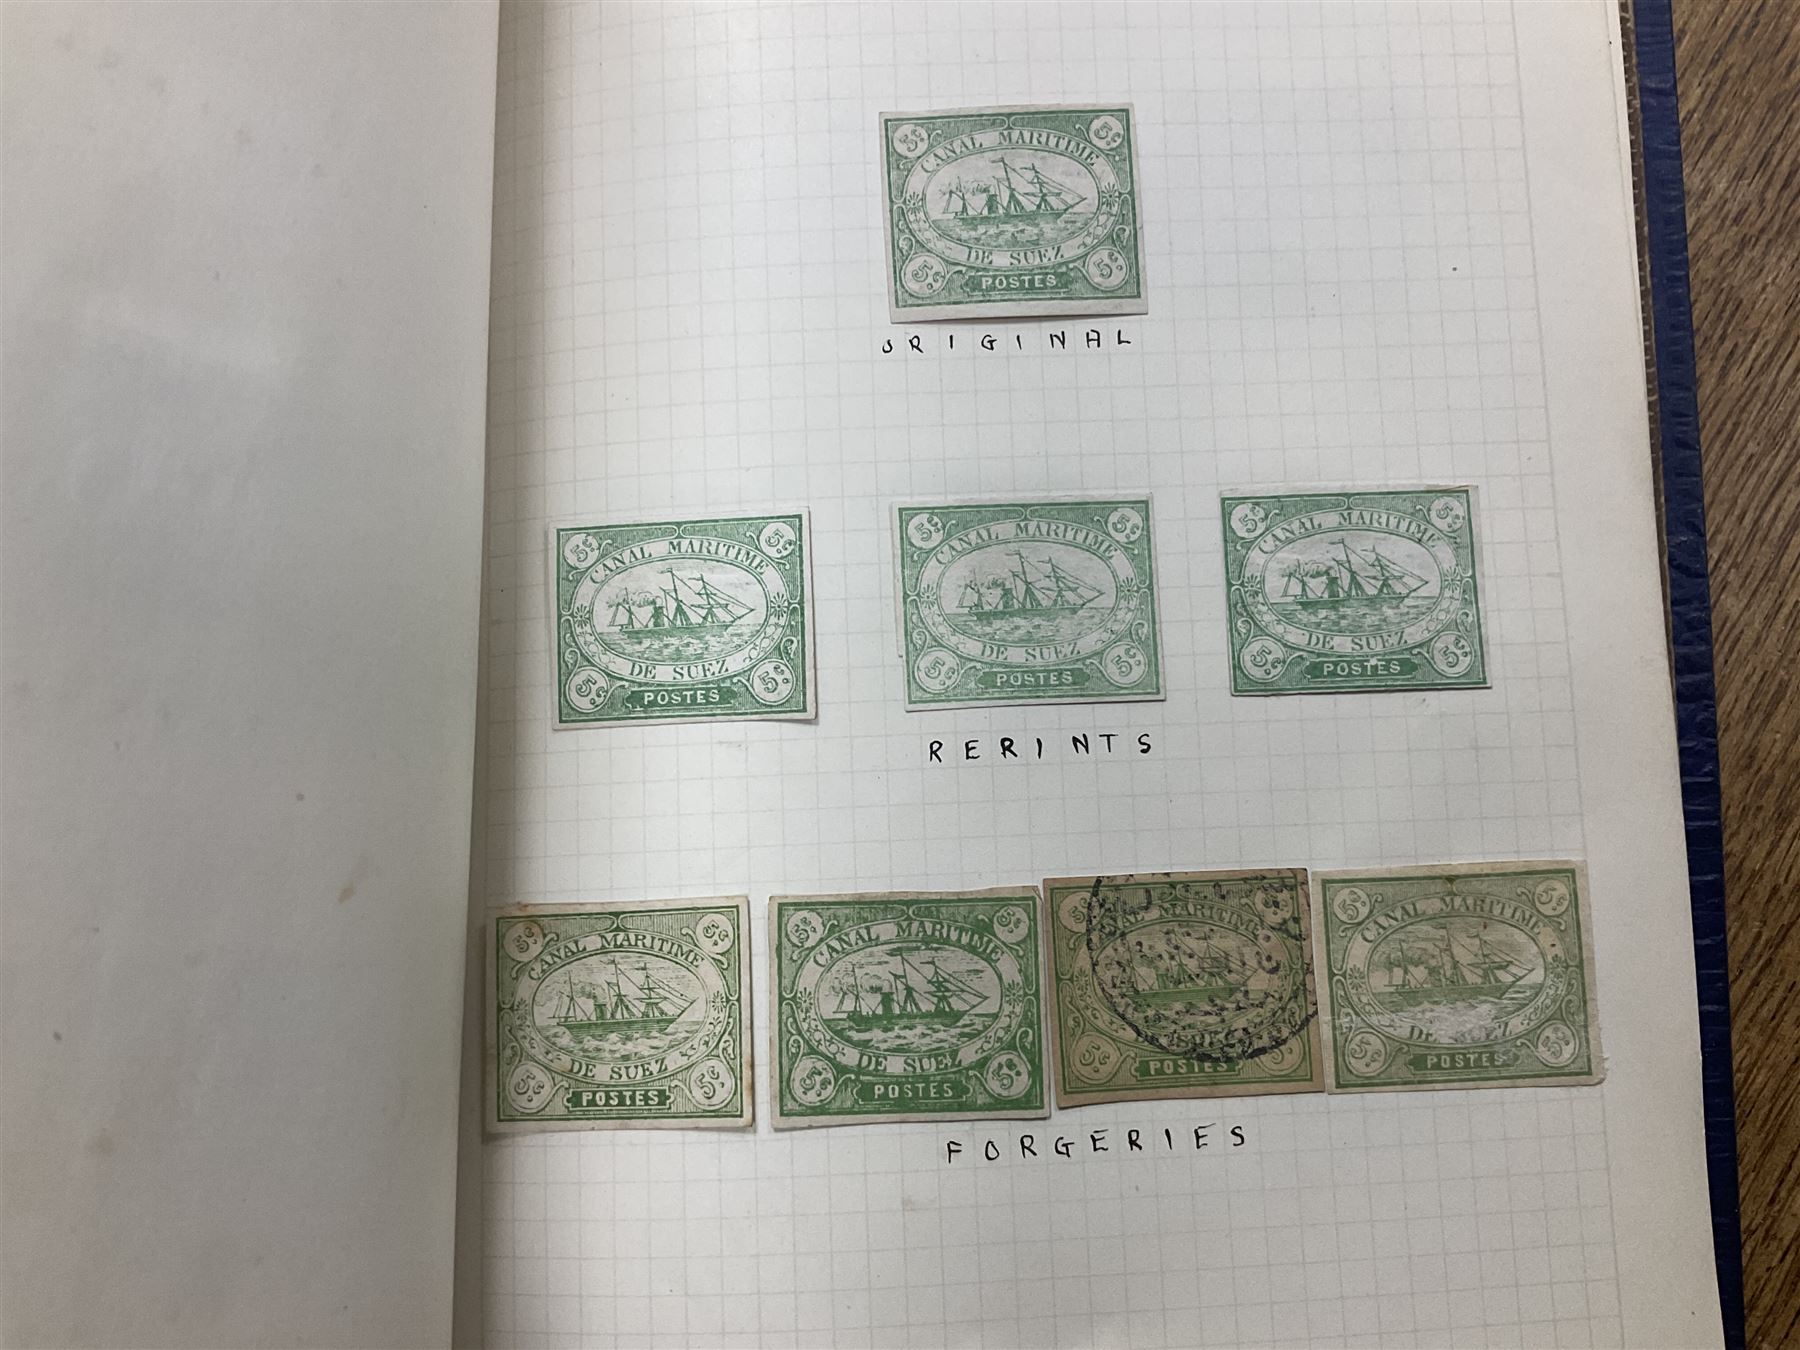 Egypt 1866 and later stamps - Image 745 of 761